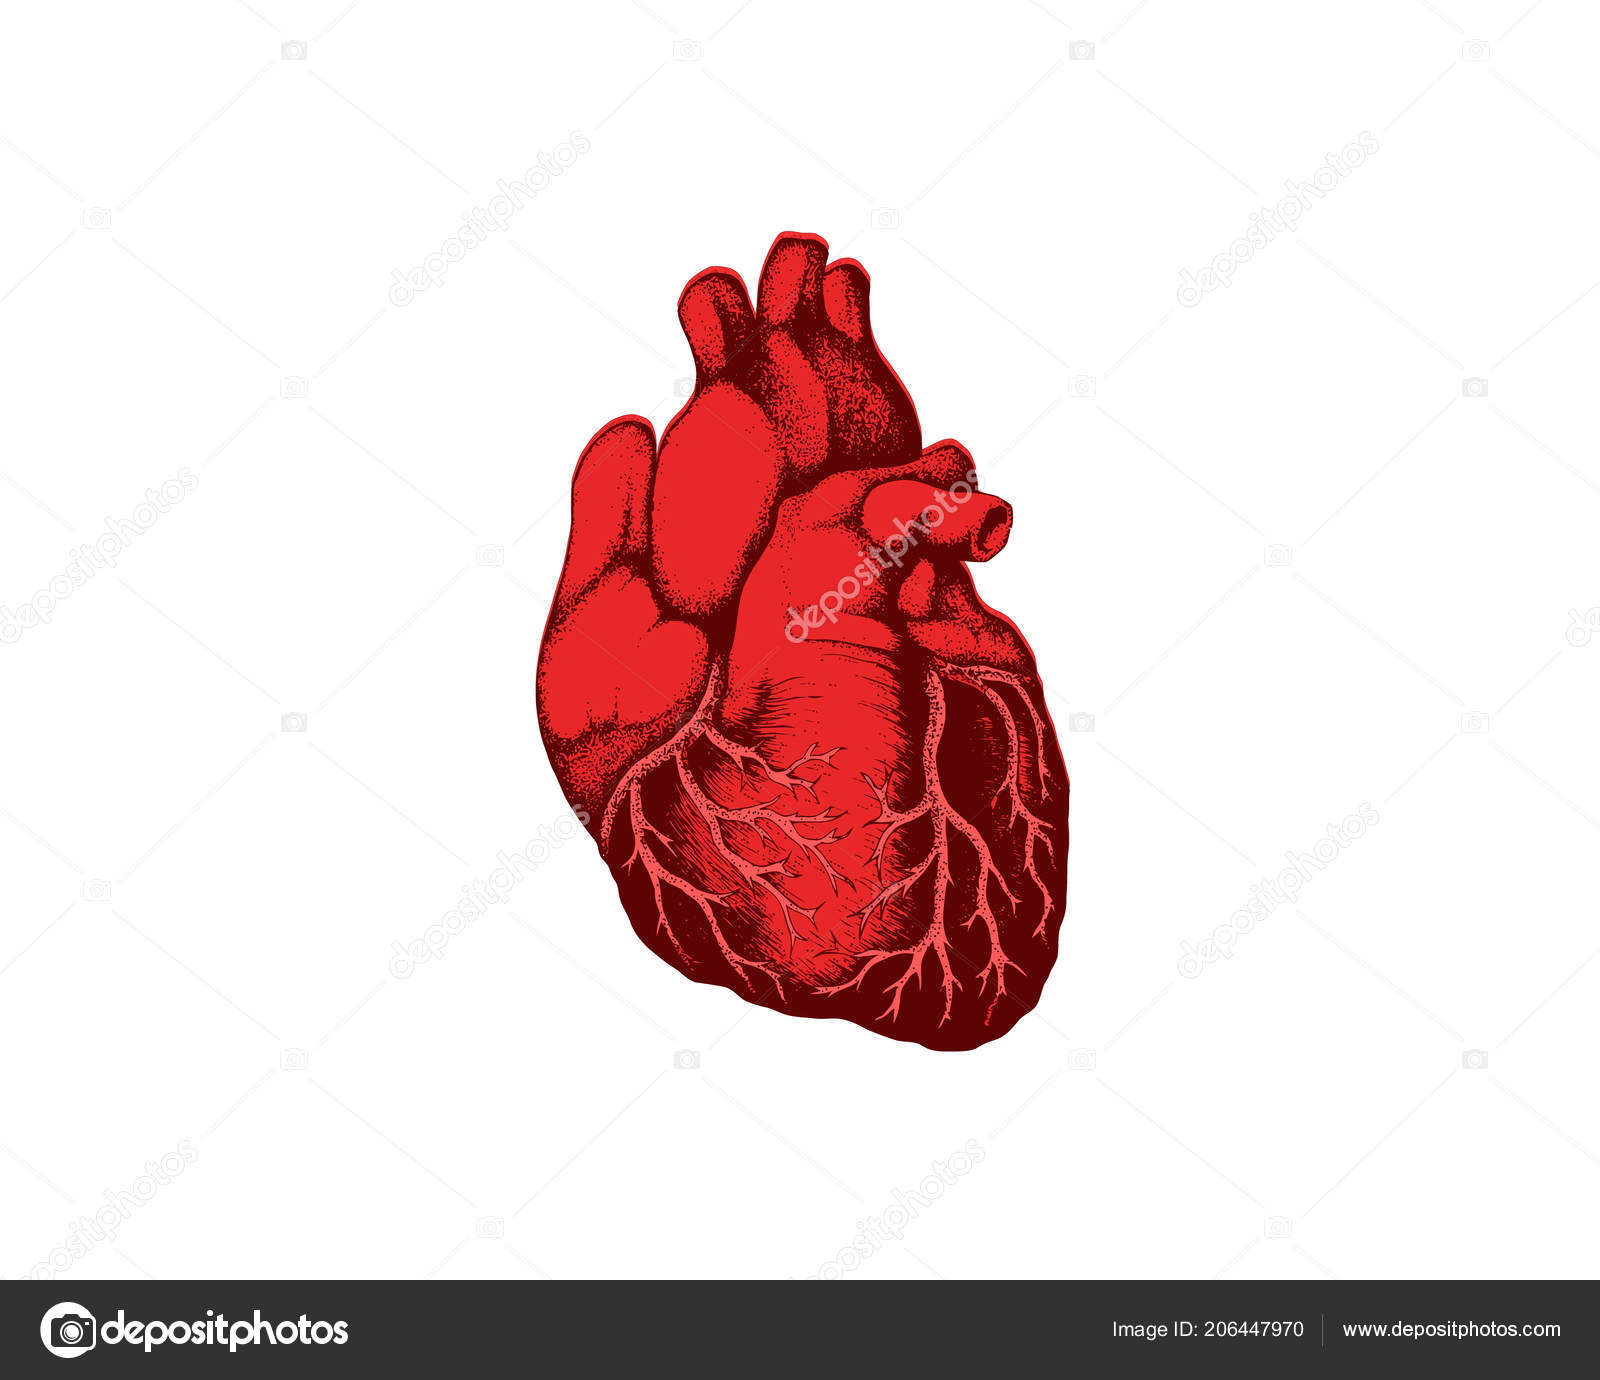 Internal View Of The Heart Realistic Detailed Human